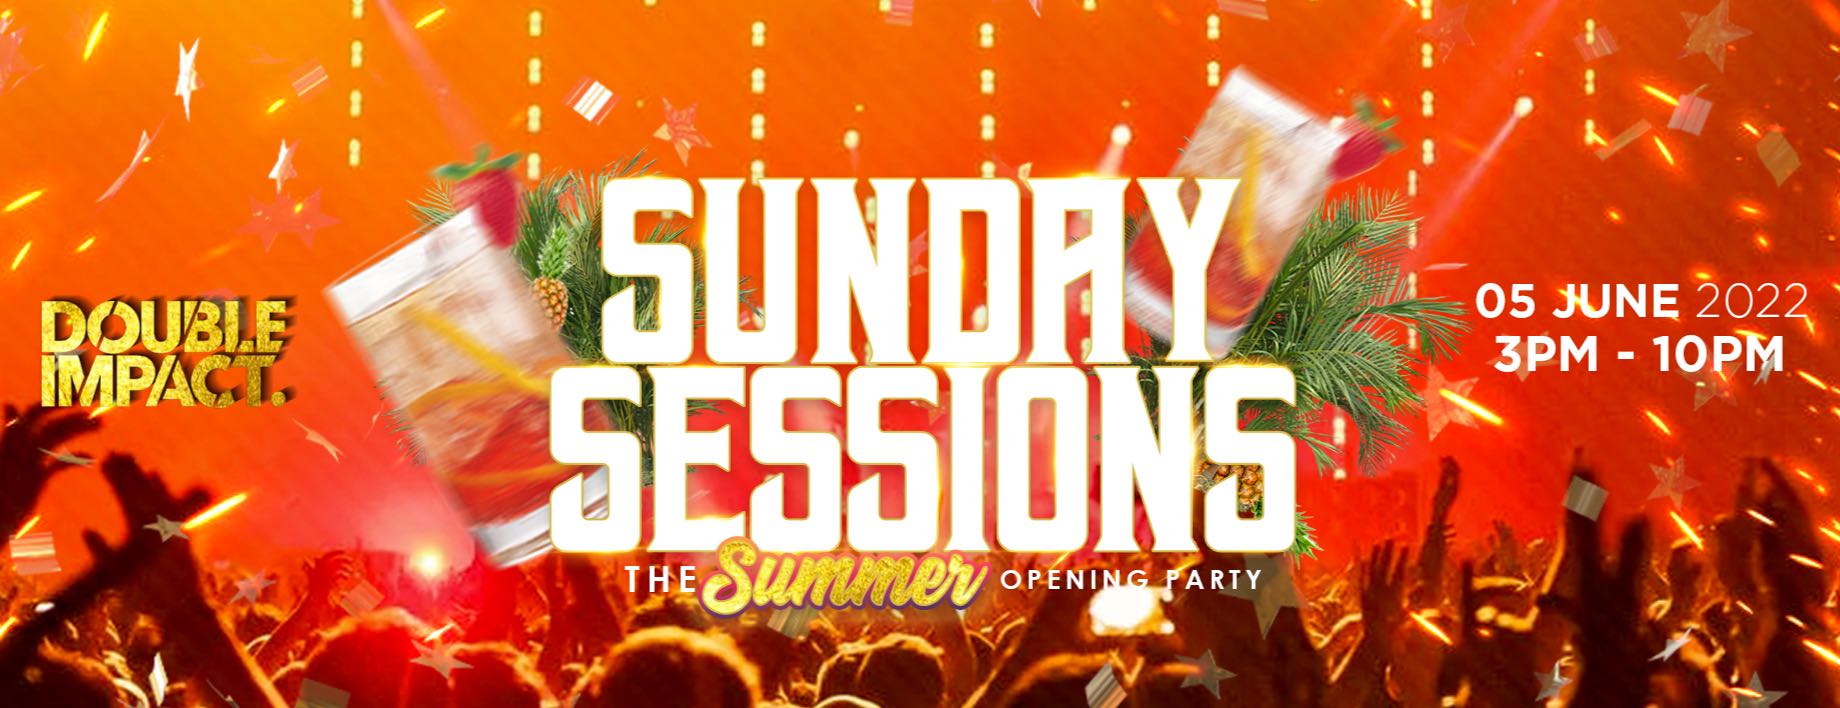 Sunday Sessions: Summer Opening Party